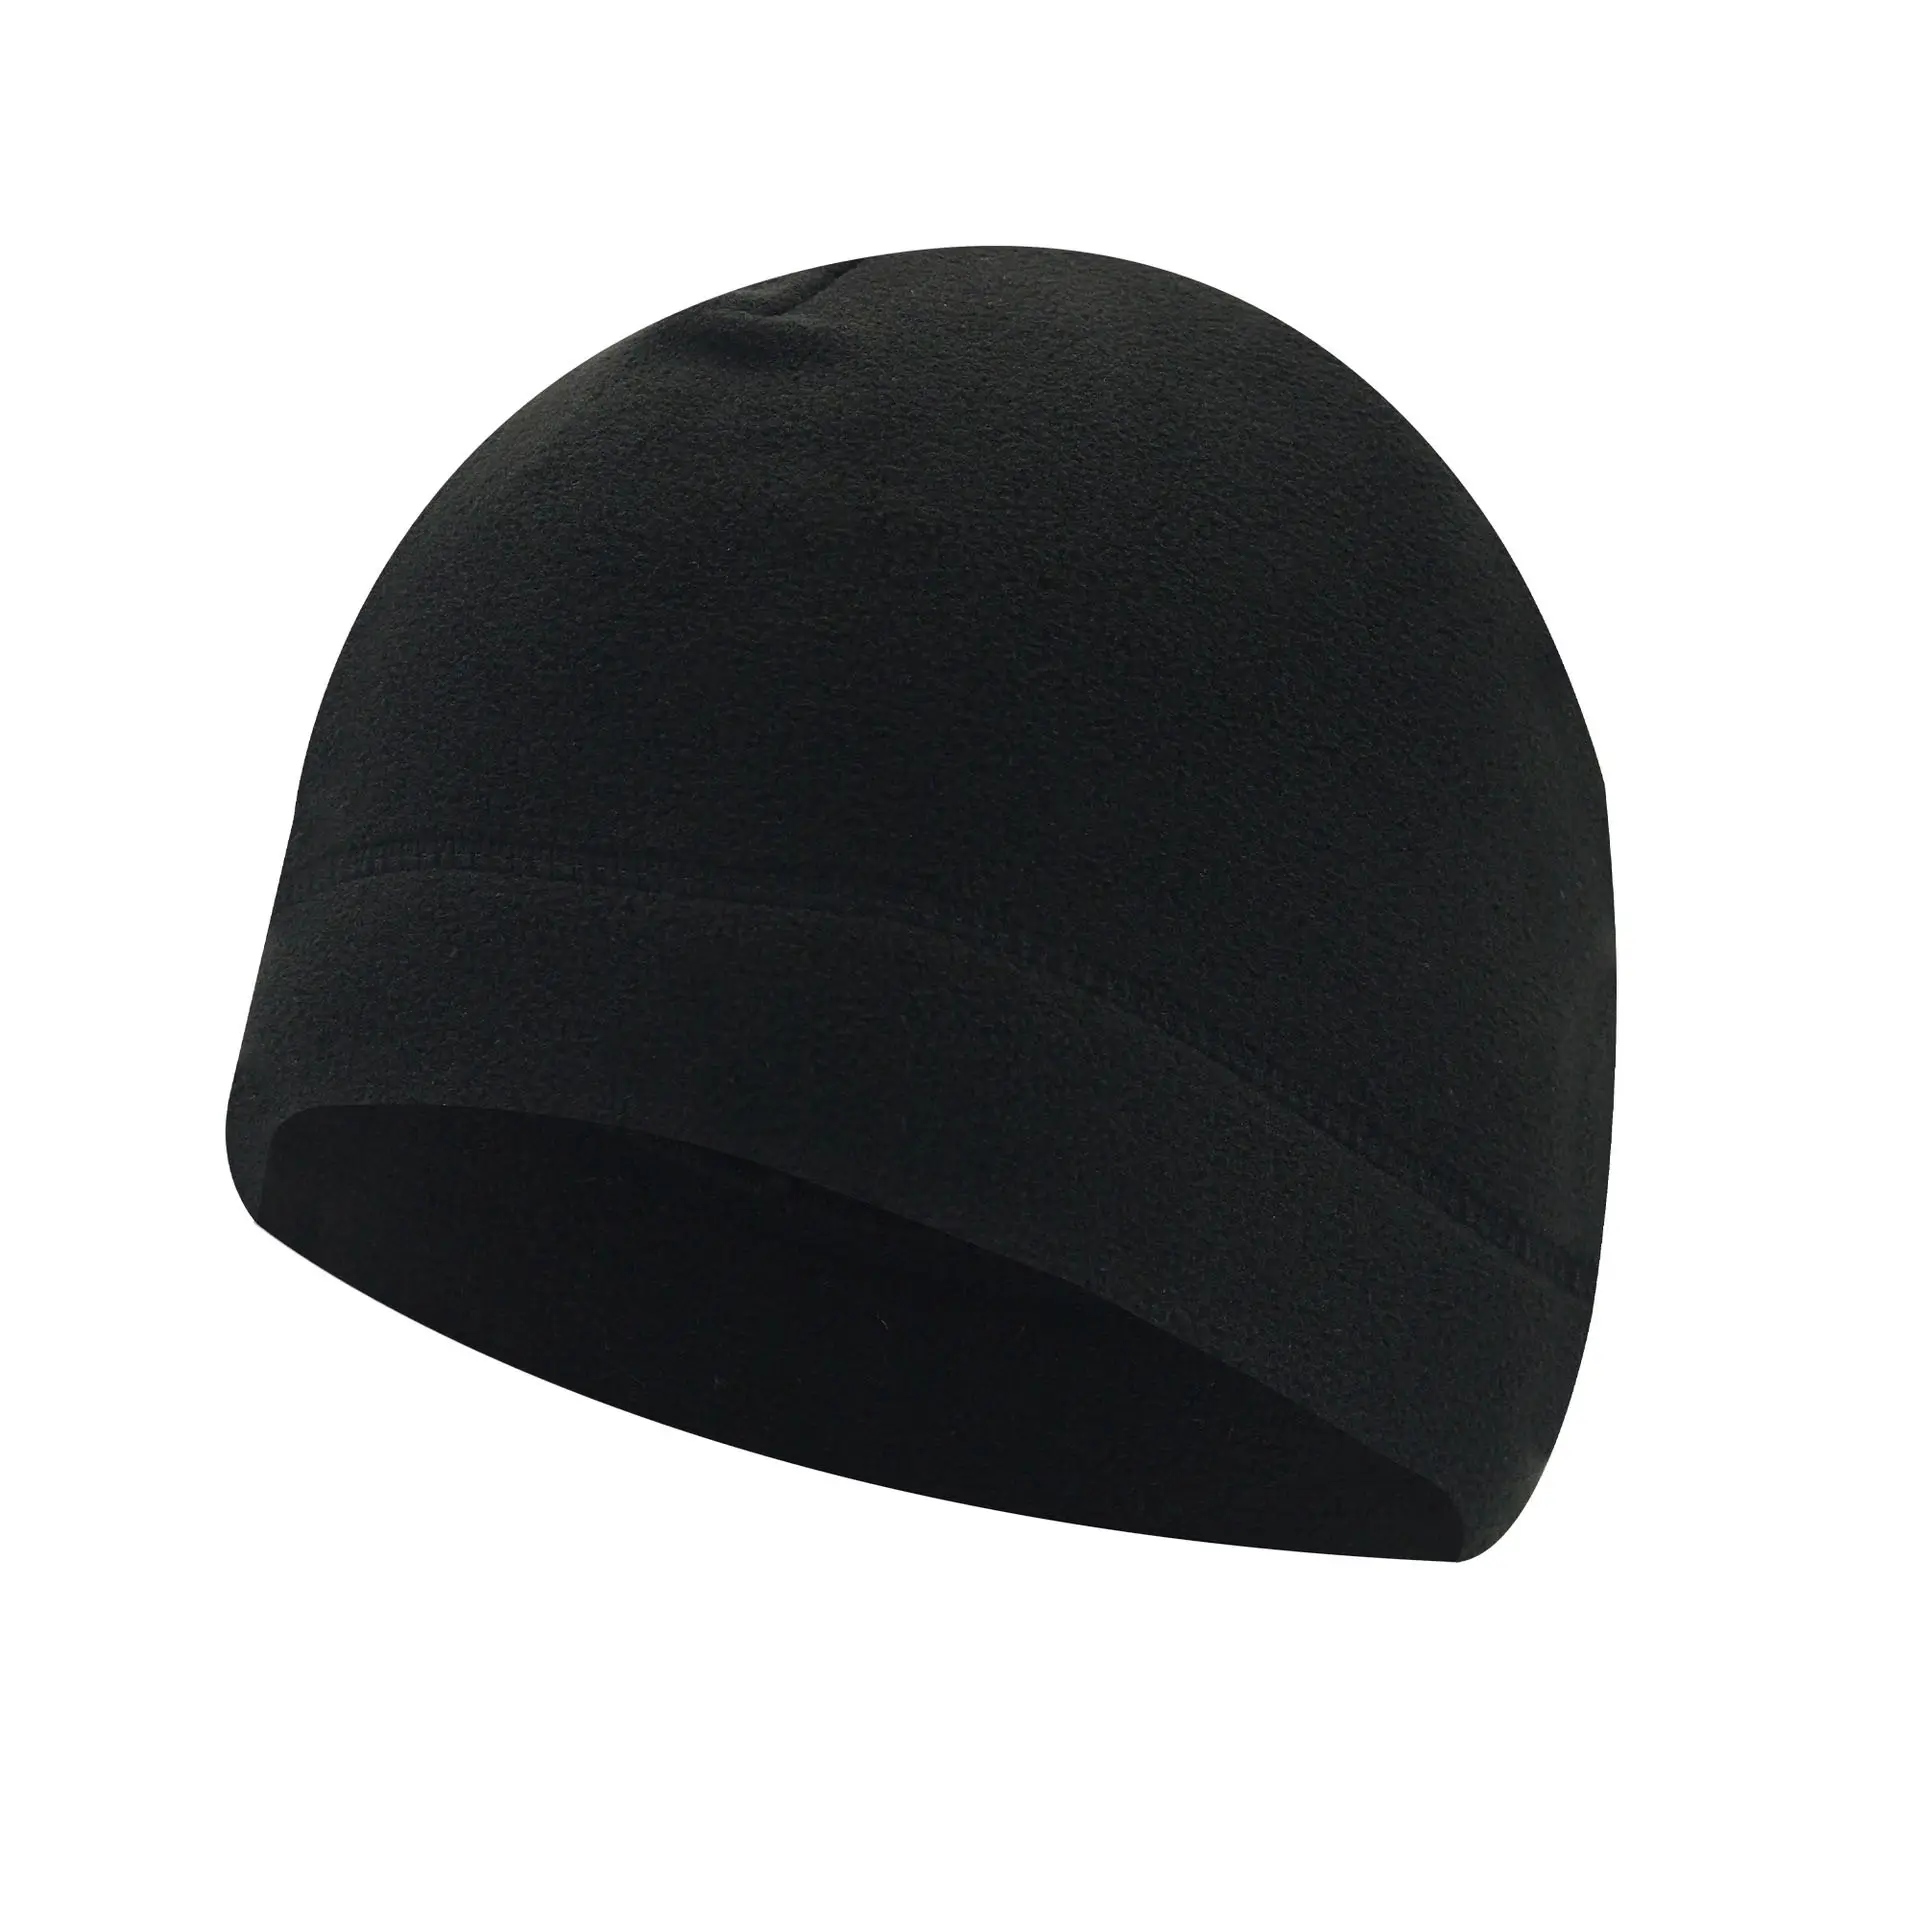 Outdoor sports for unisex in autumn and winter: cold proof, windproof, warm, mountaineering, cycling, skiing fleece Hat